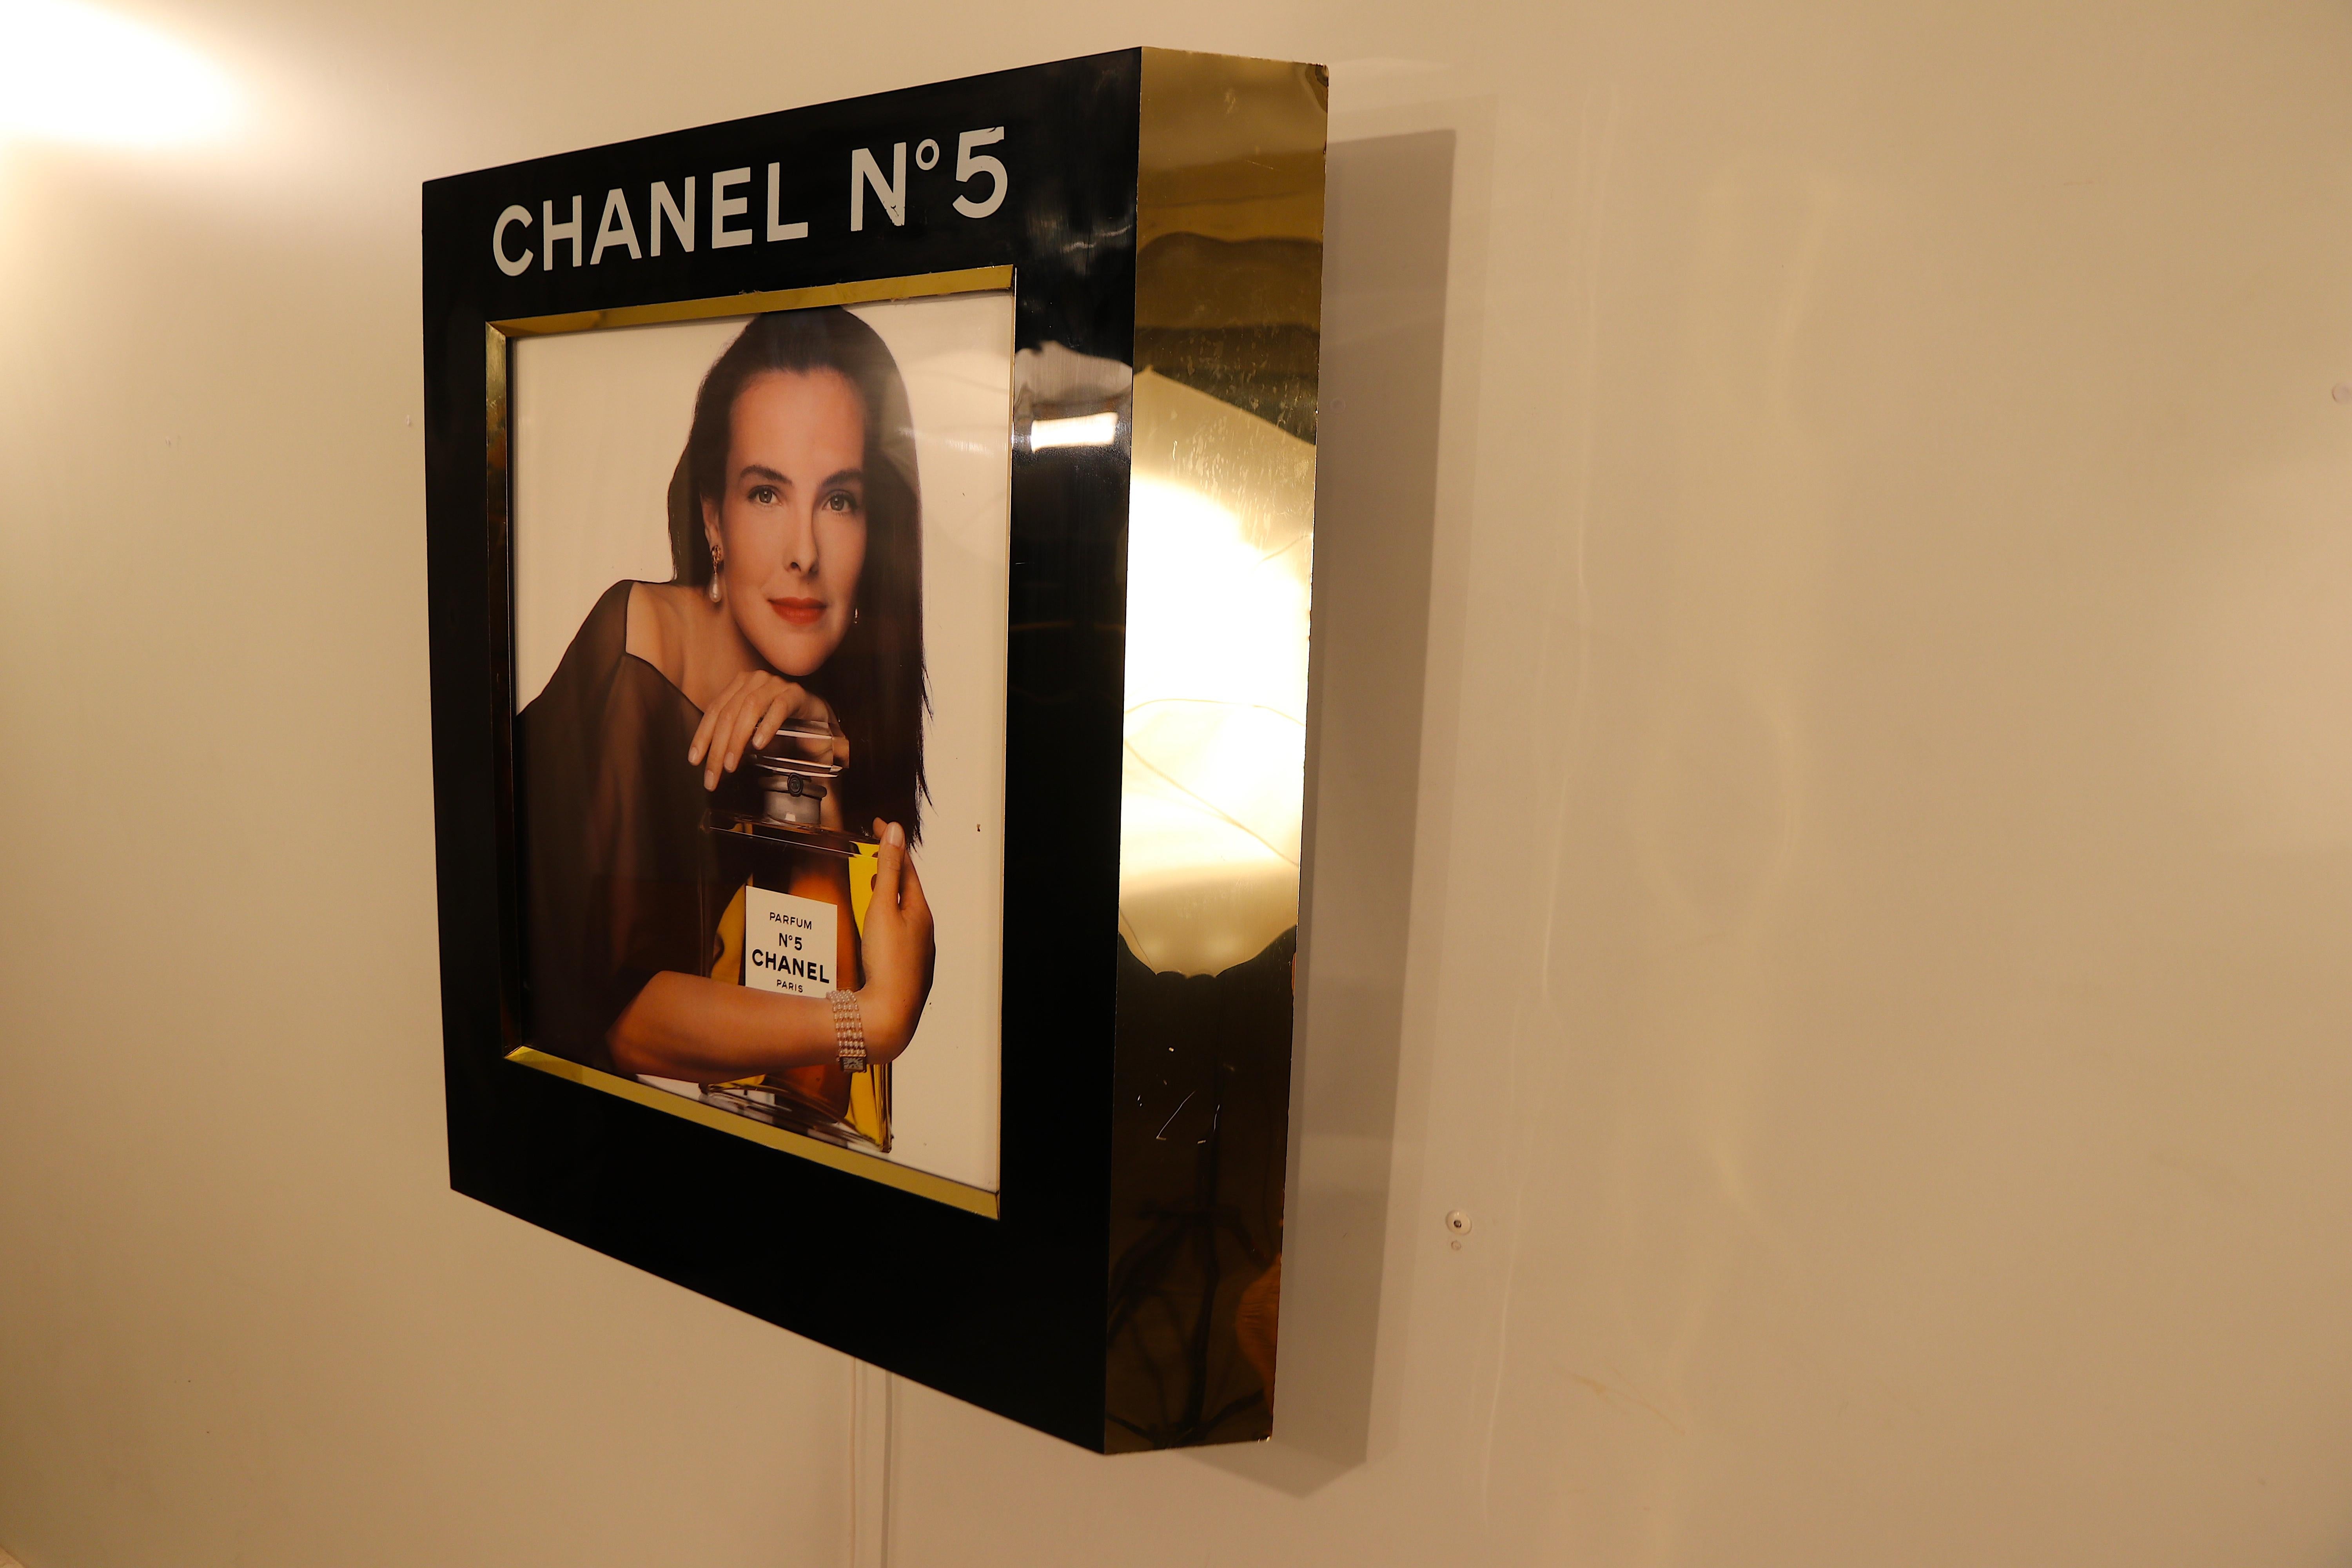 Wonderful back-lit original wall-mounted Chanel advertisement display formerly used in the perfume stores at the business jet-only airport 